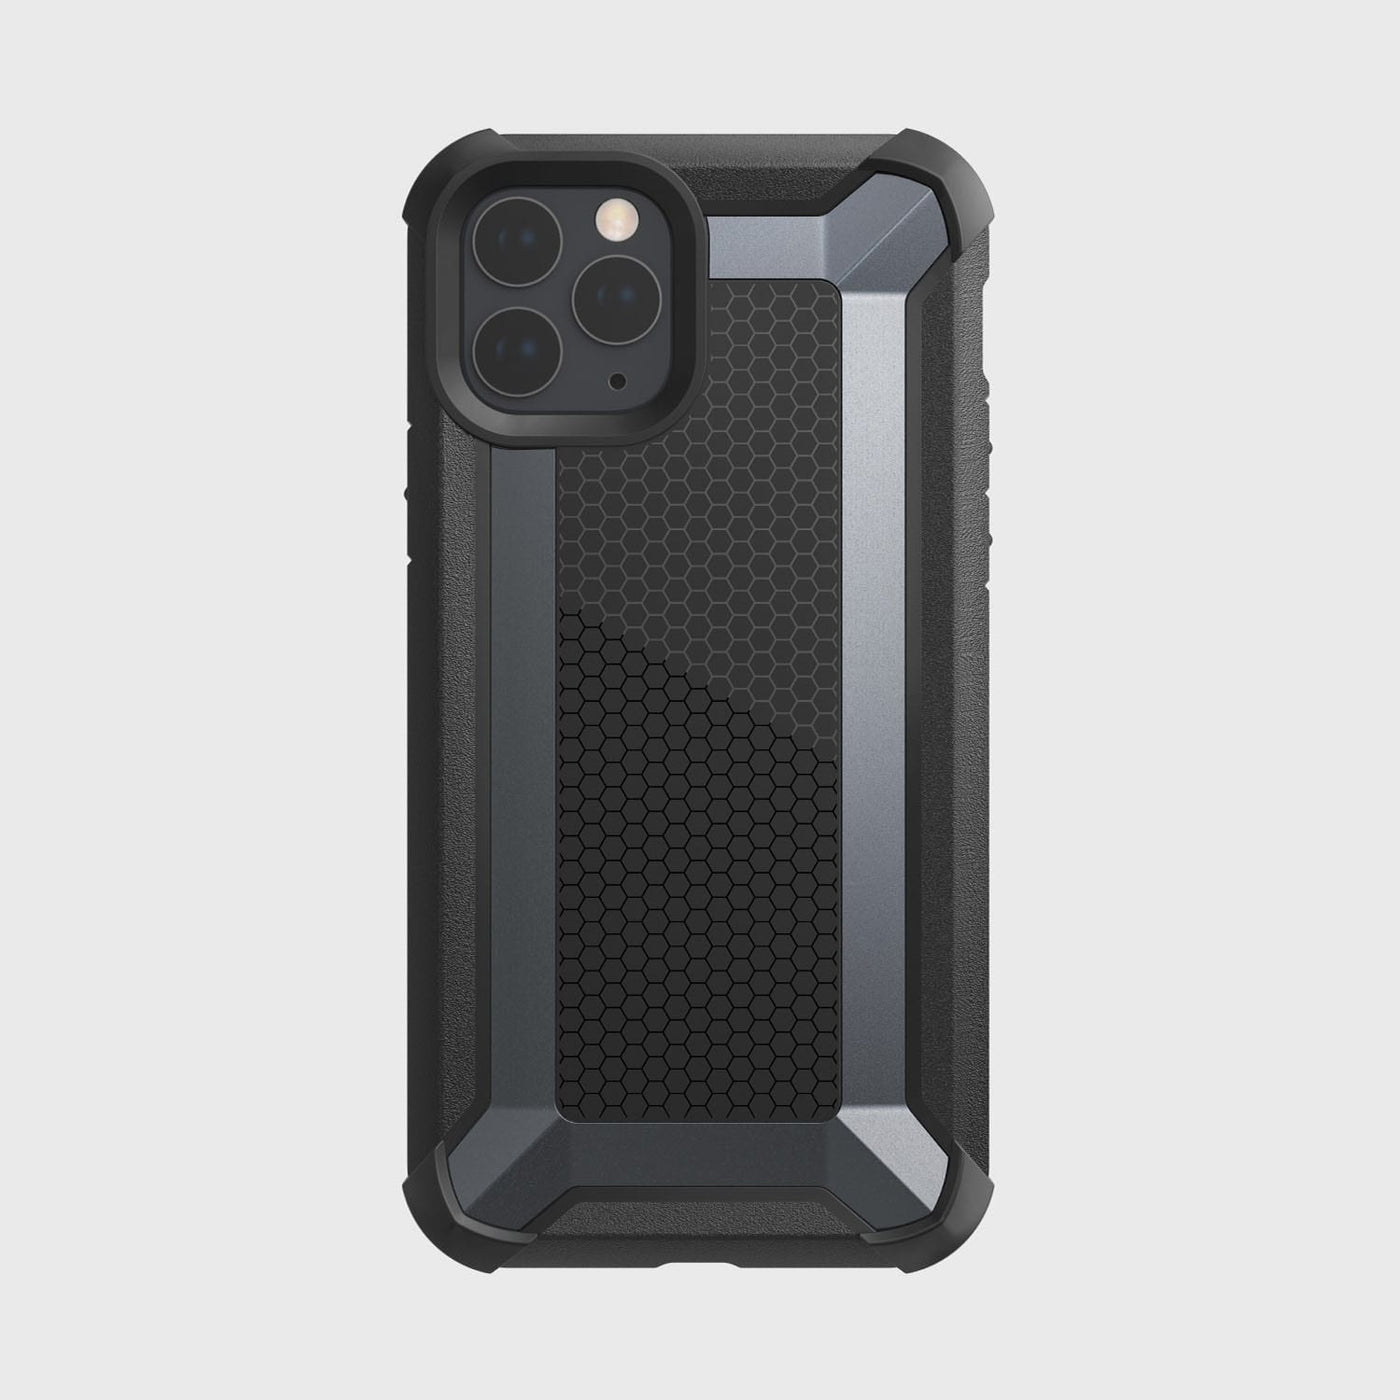 iPhone 11 Pro Case - TACTICAL